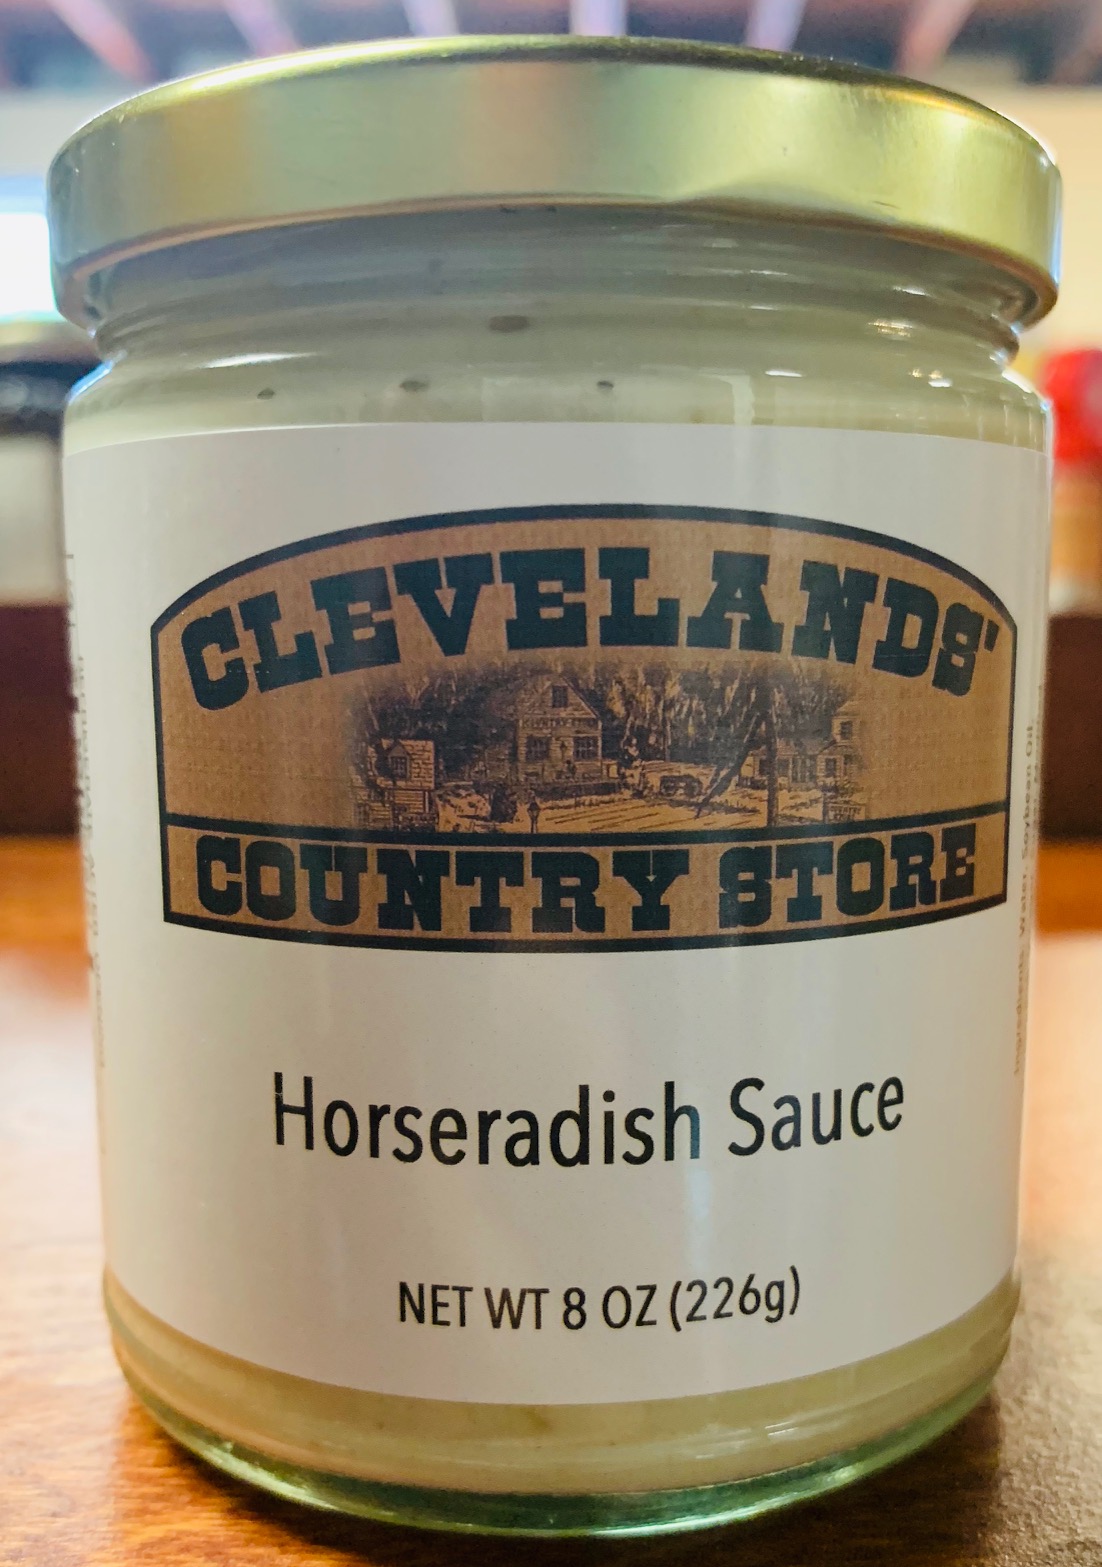 Horseradish Sauce – Clevelands’ Country Store